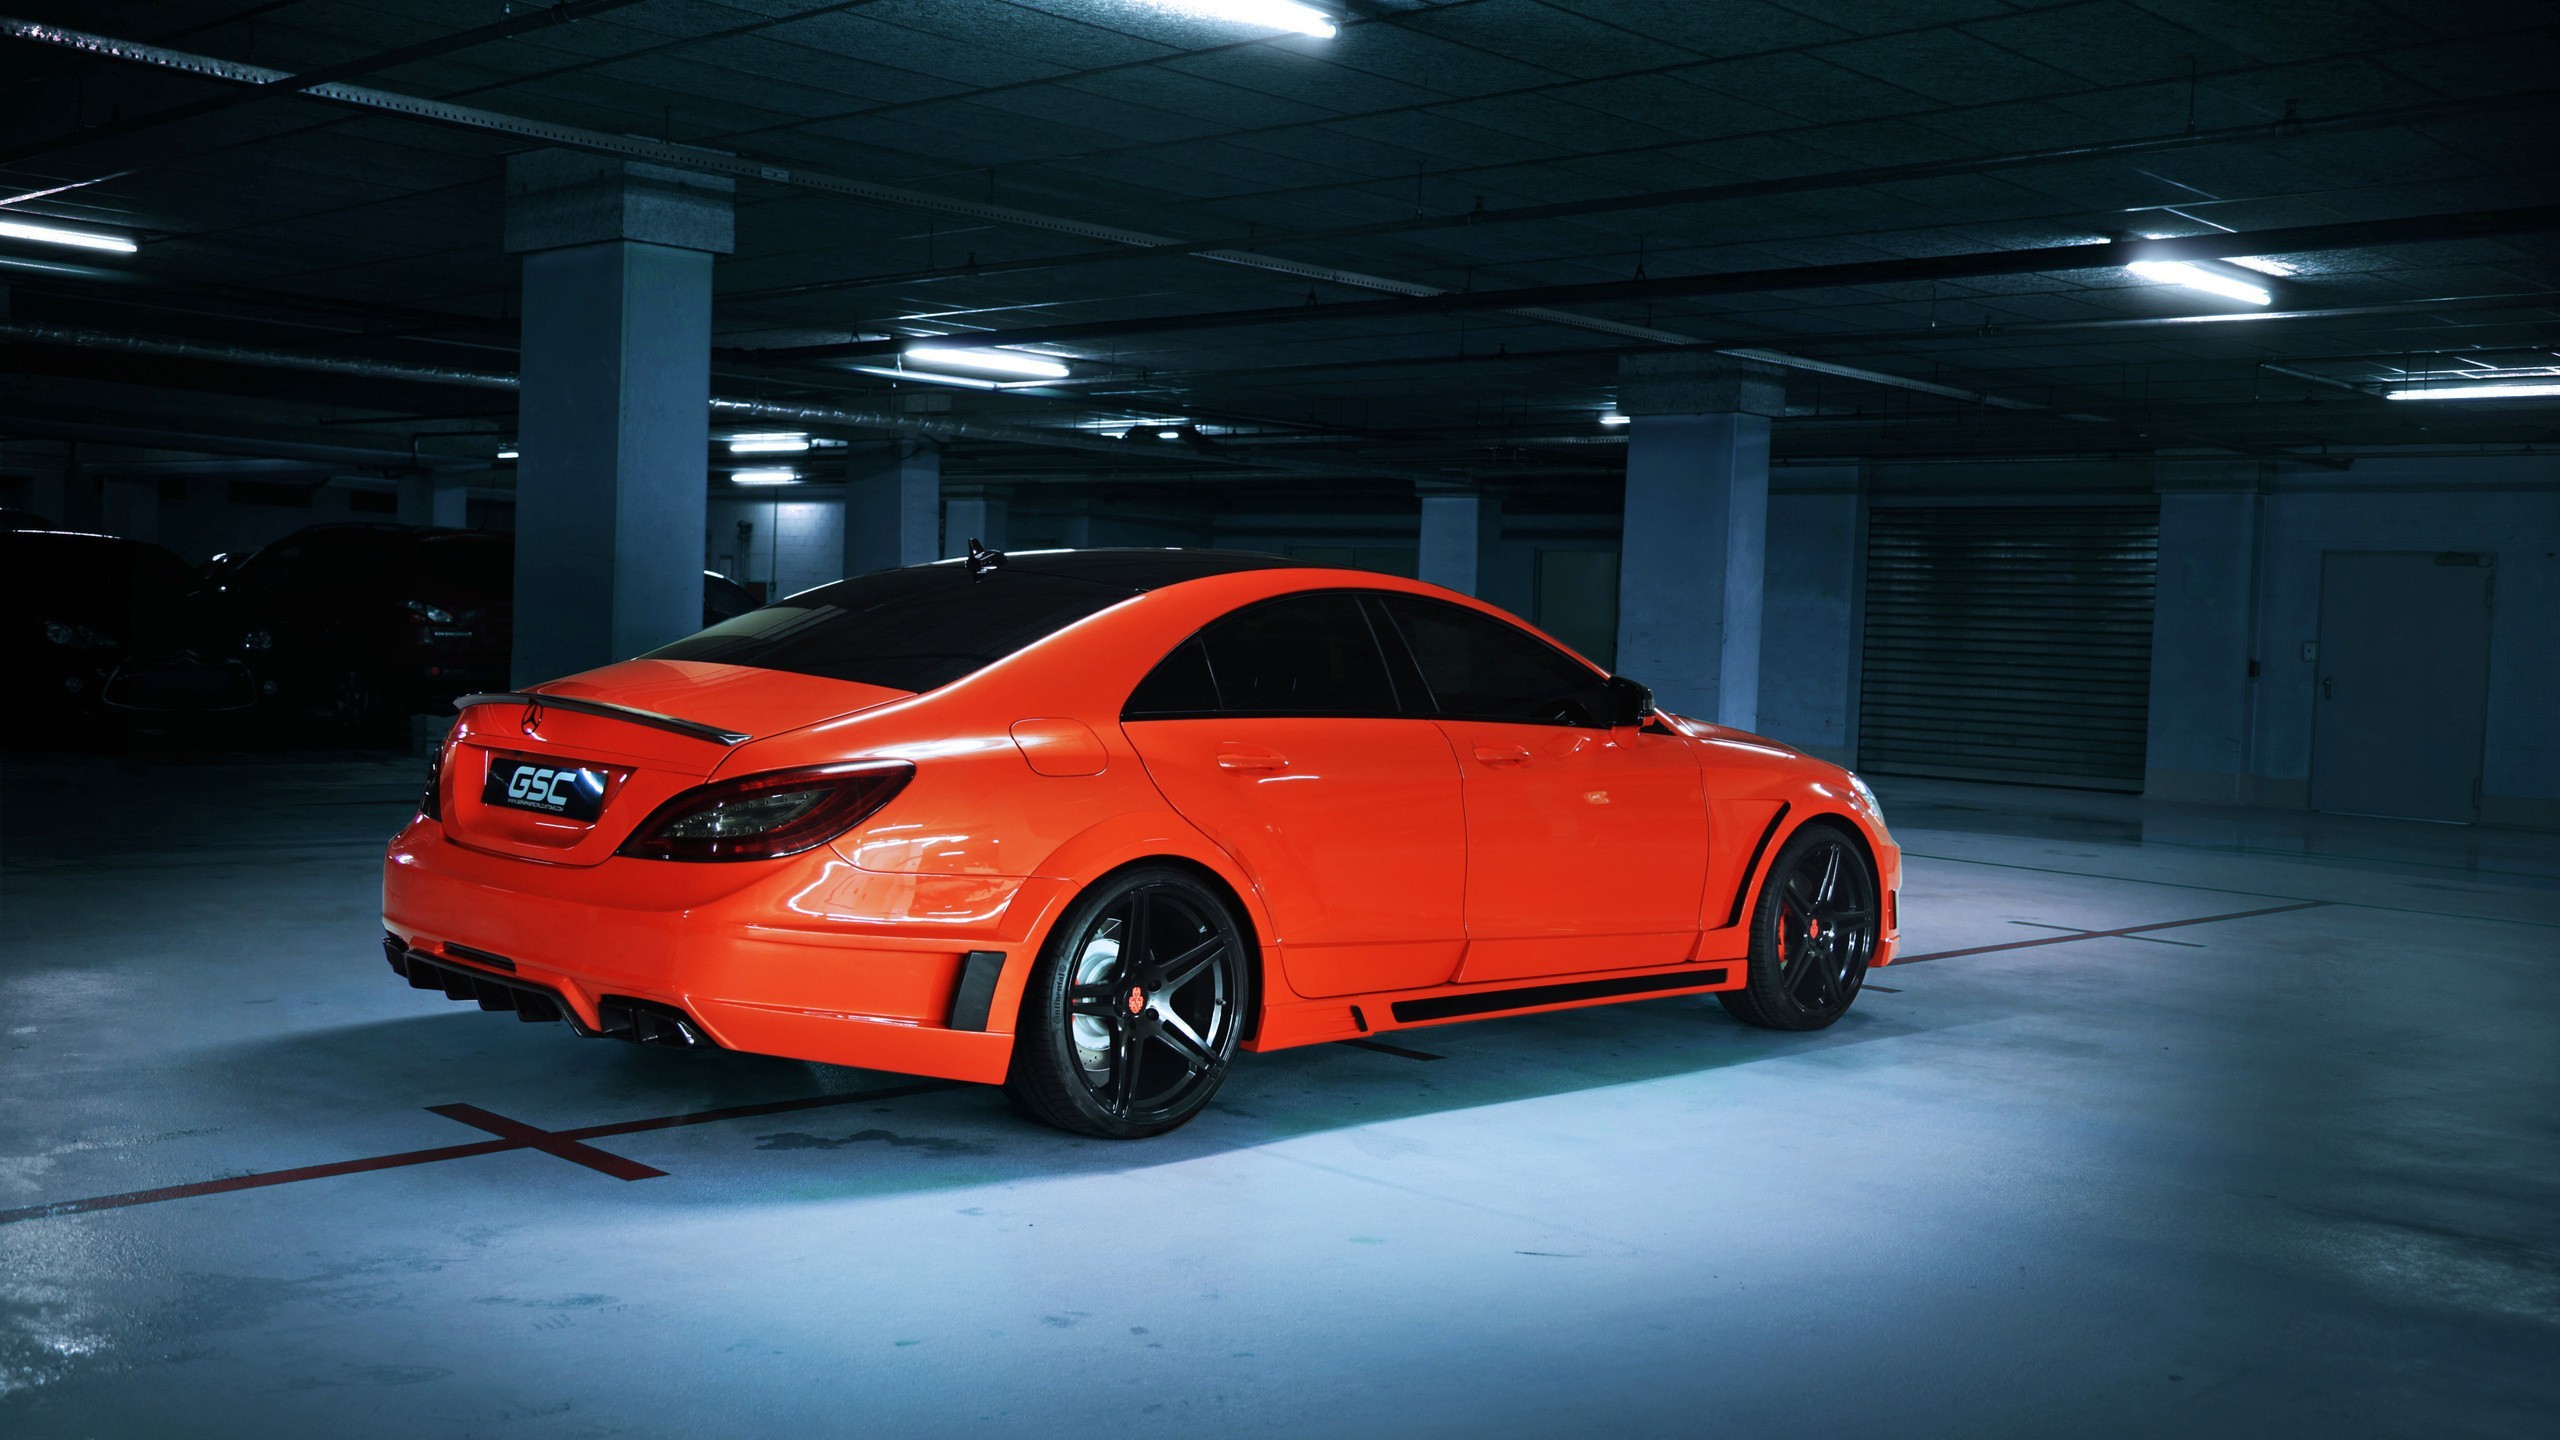 2560x1440 Red Mercedes-Benz in a parking lot in the basement wallpapers and images -  wallpapers, pictures, photos